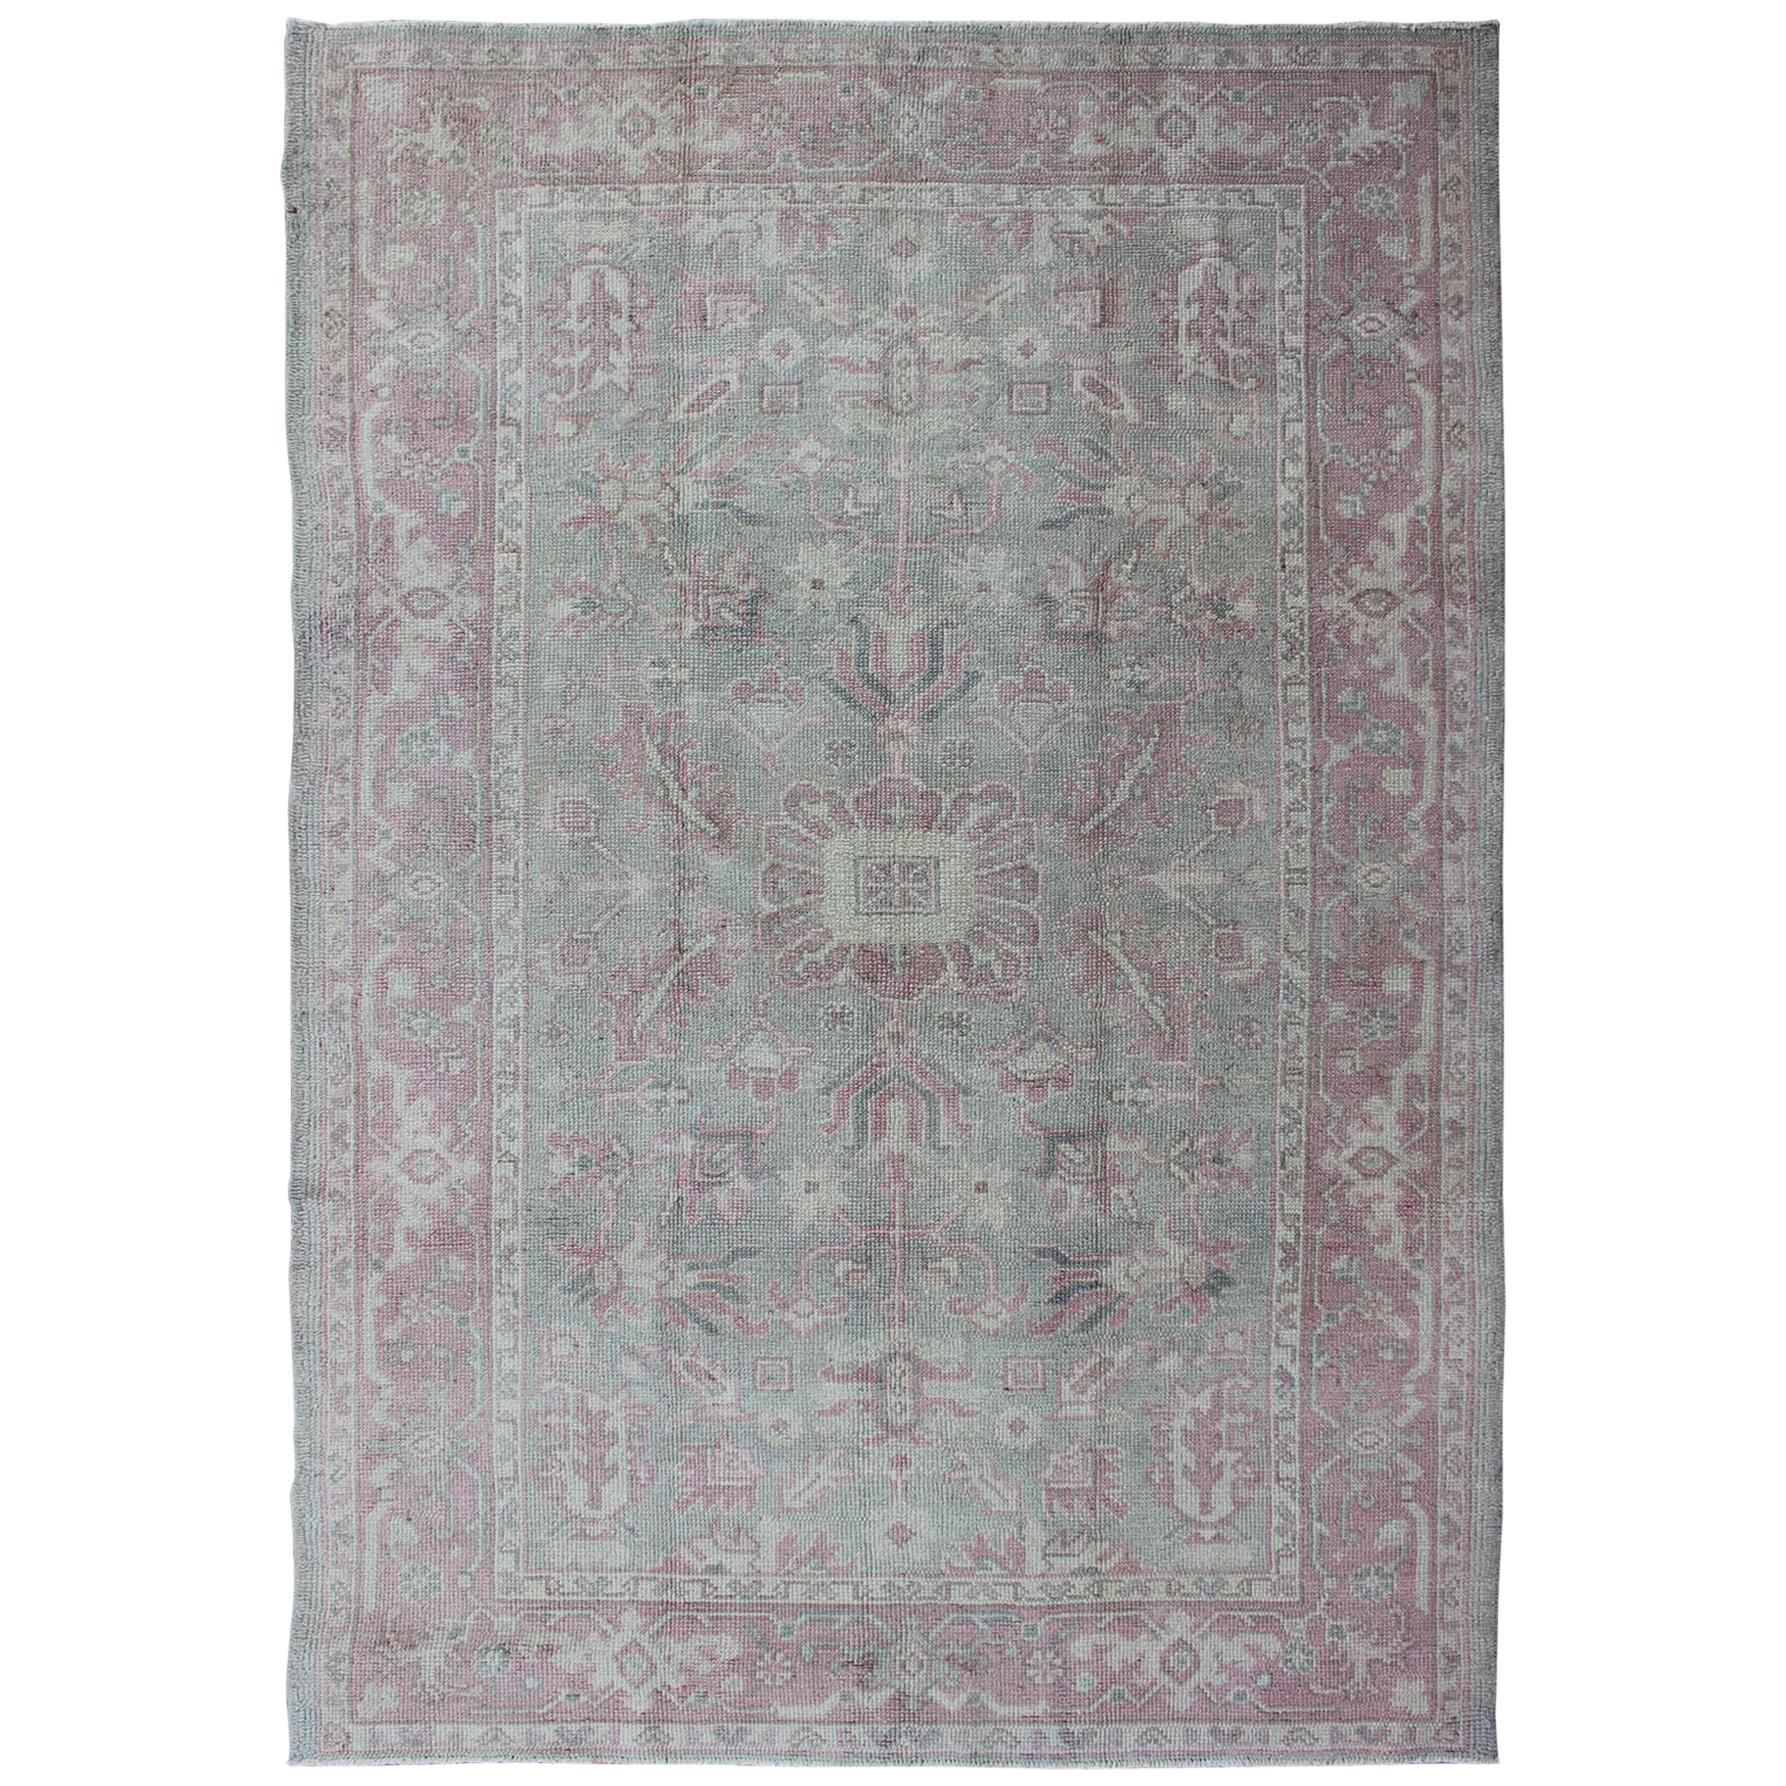 Geometric Antique Turkish Oushak Rug in Pink and Light Green